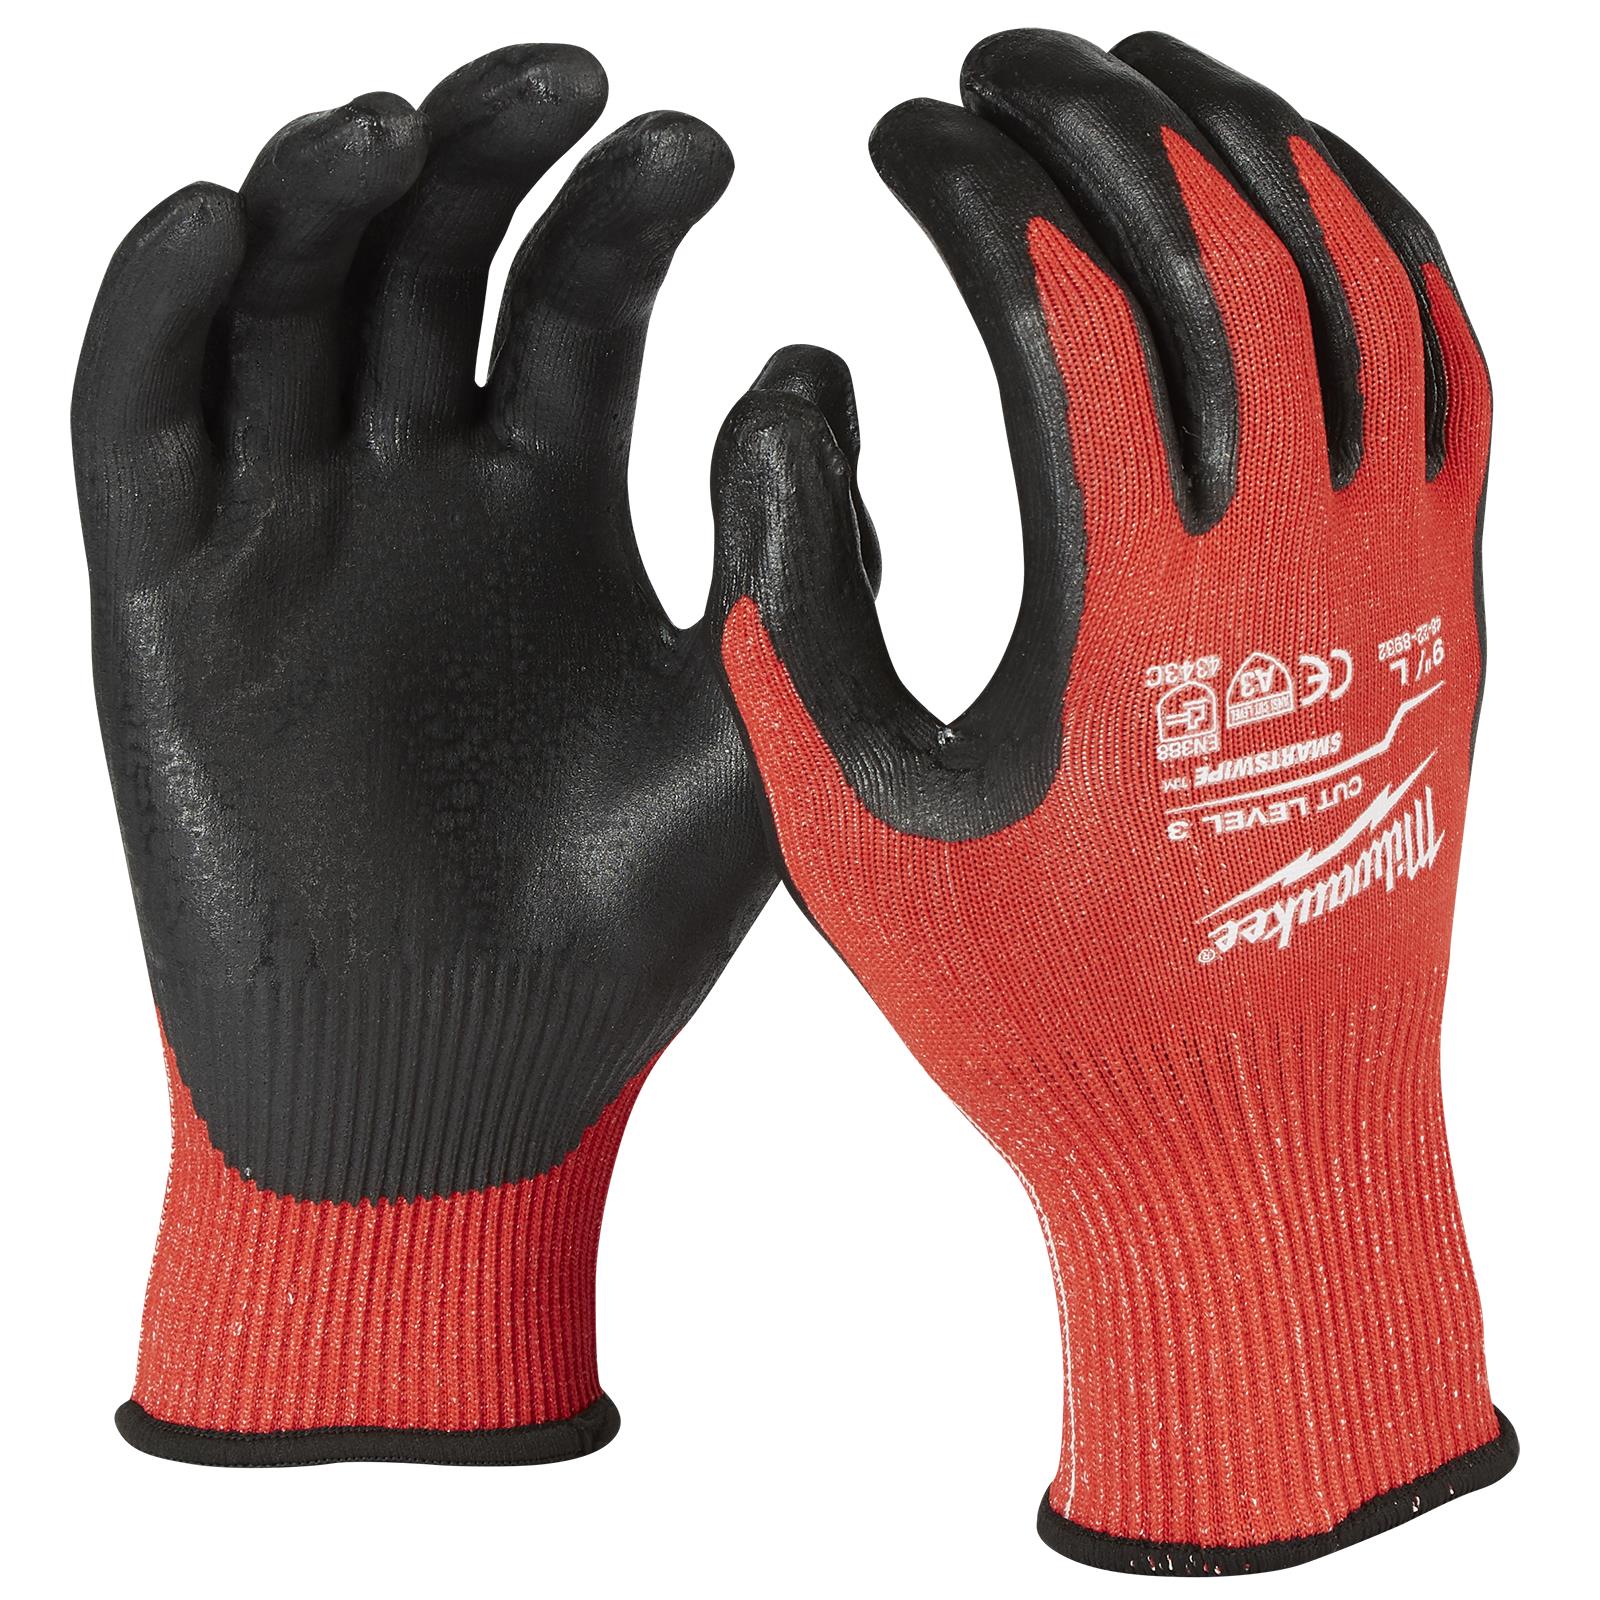 Milwaukee Safety Gloves Cut Level 3/C Dipped Glove Size 10 / XL Extra Large